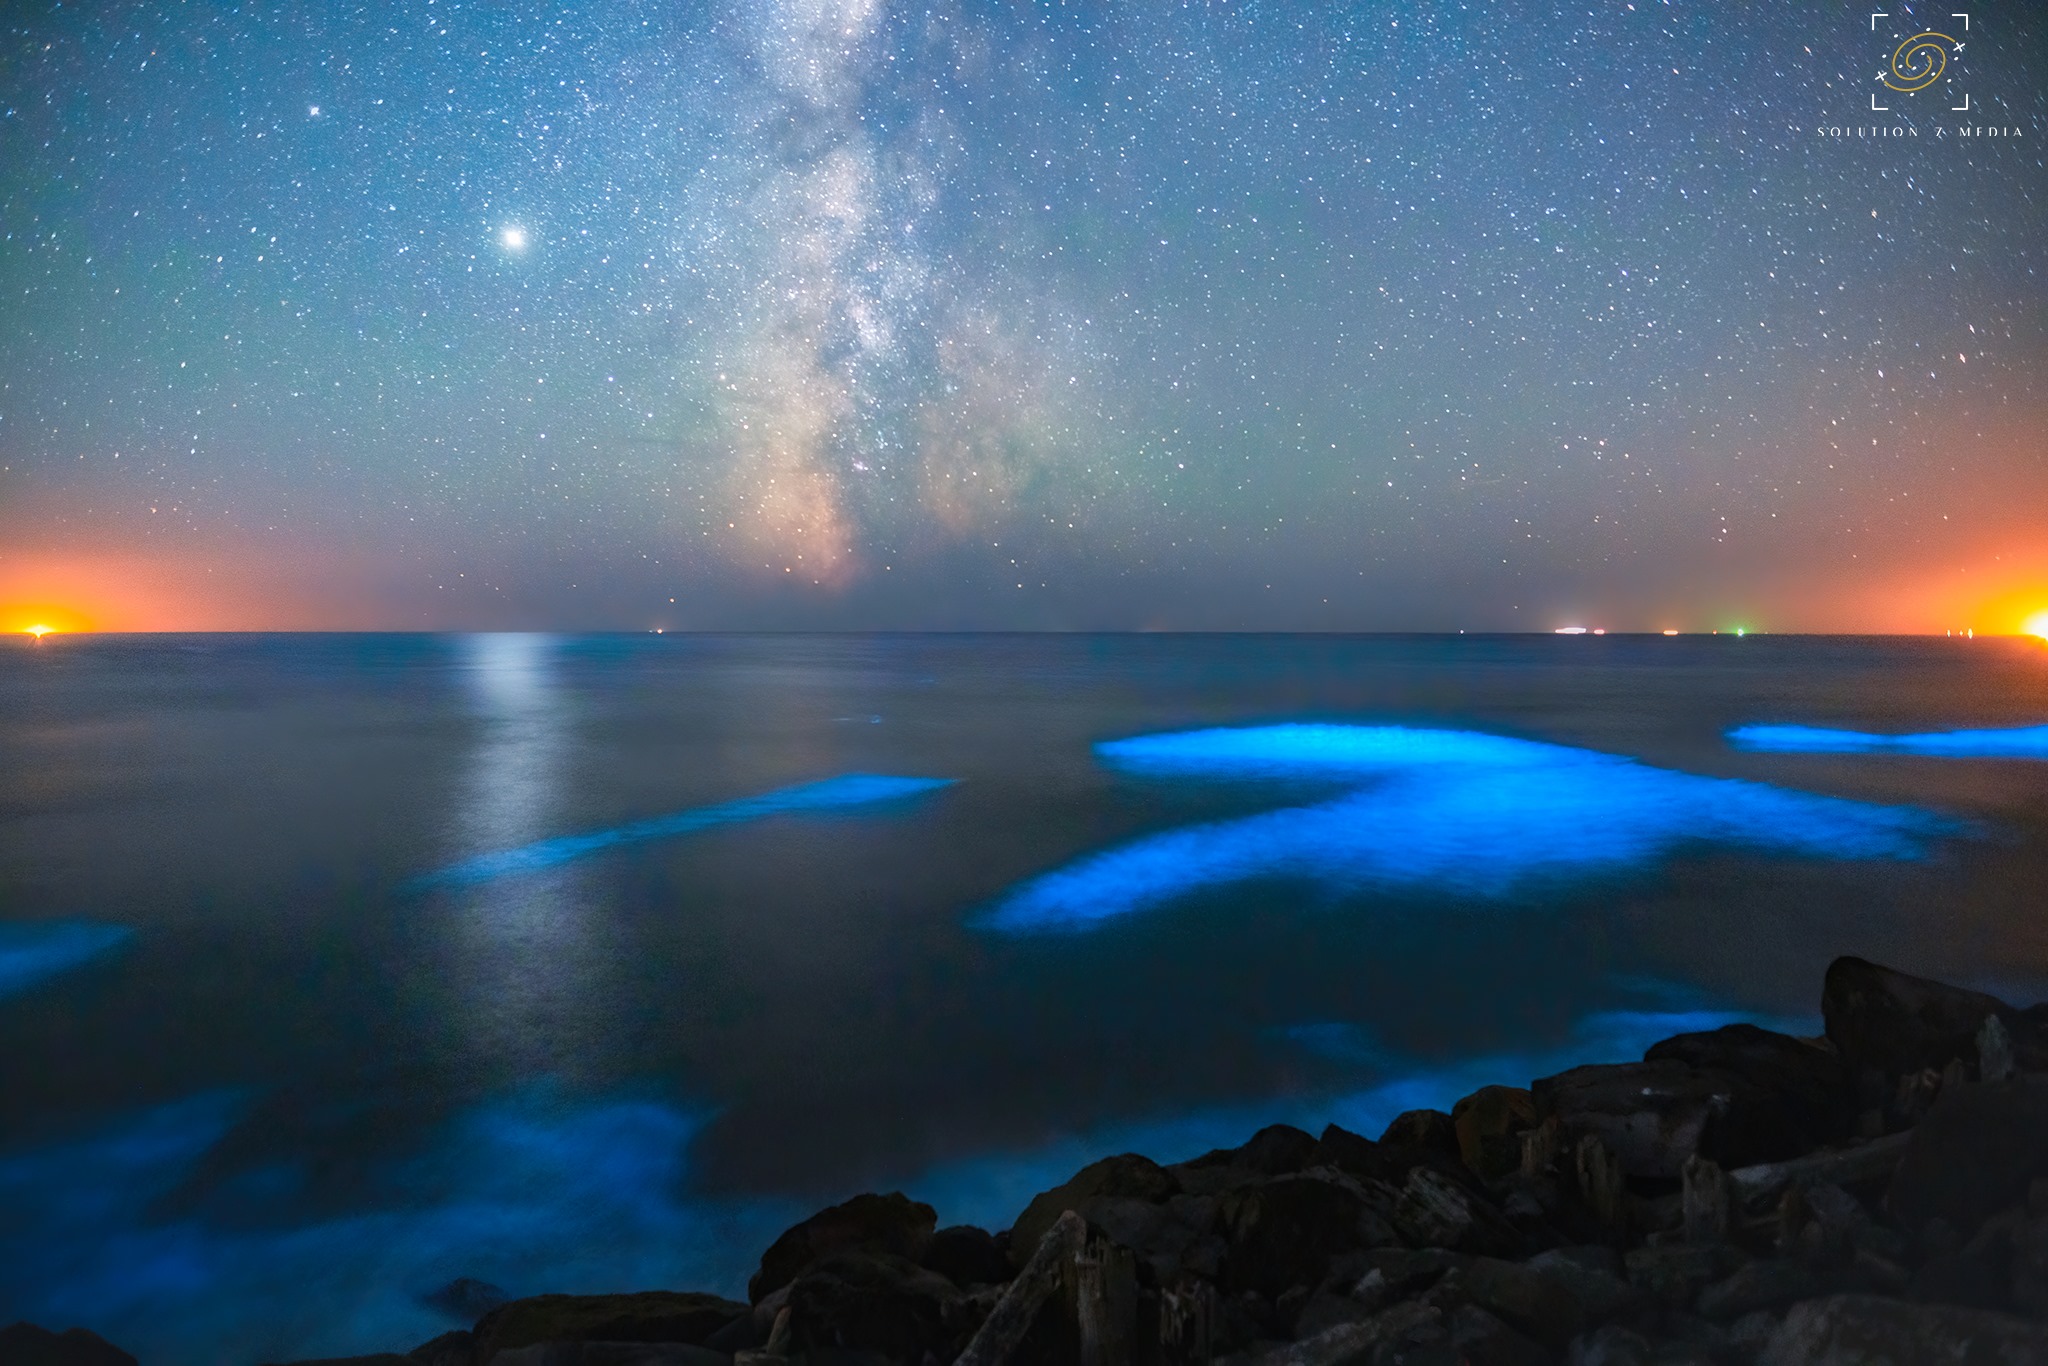 Bioluminescent Waves Caught In Surreal Photos